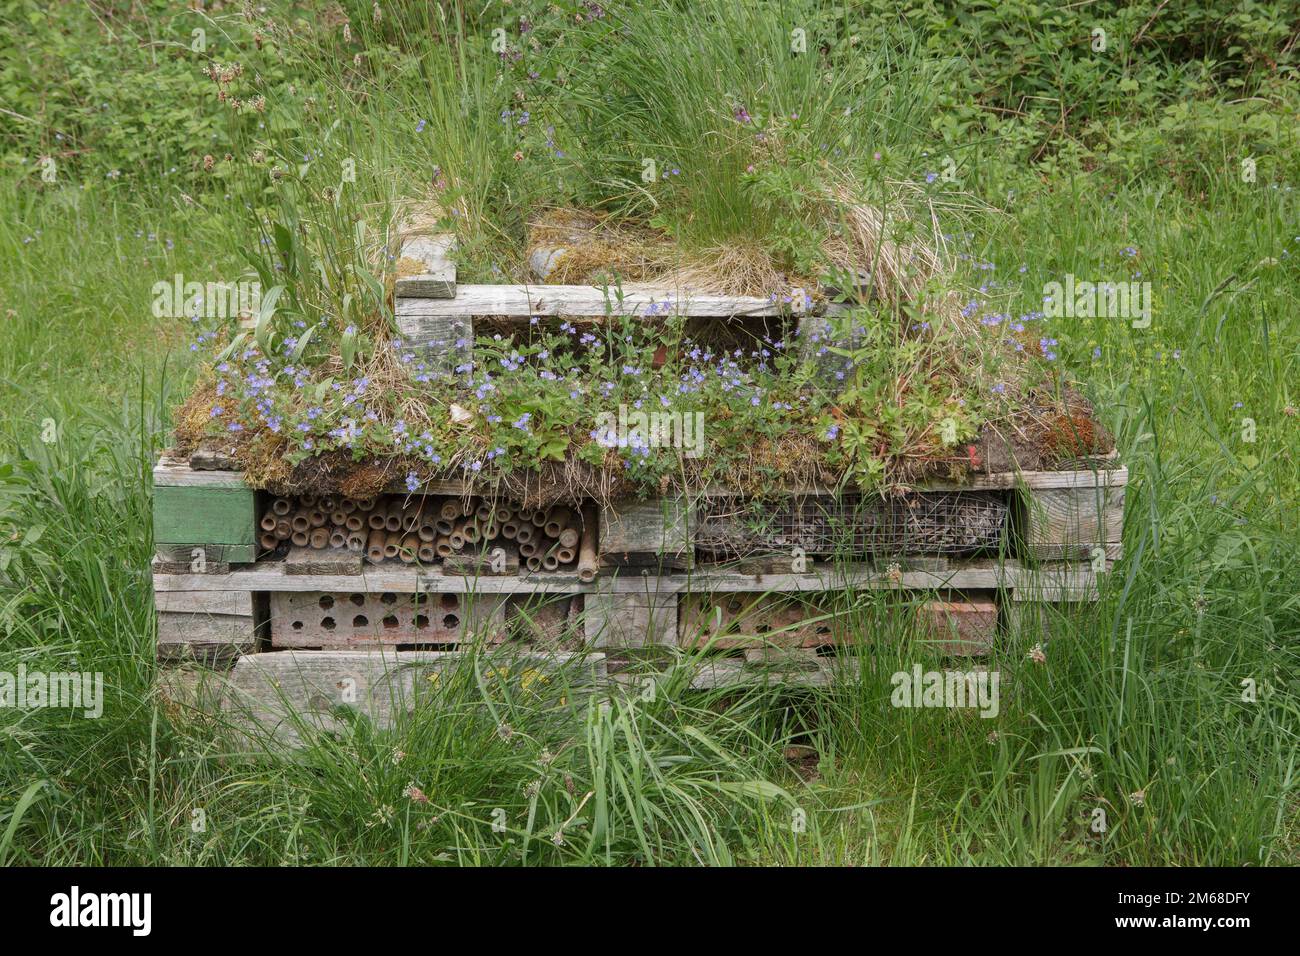 A man made habitat for insects and wildlife, often called a bug hotel, made from wooden pallets and old bricks Stock Photo